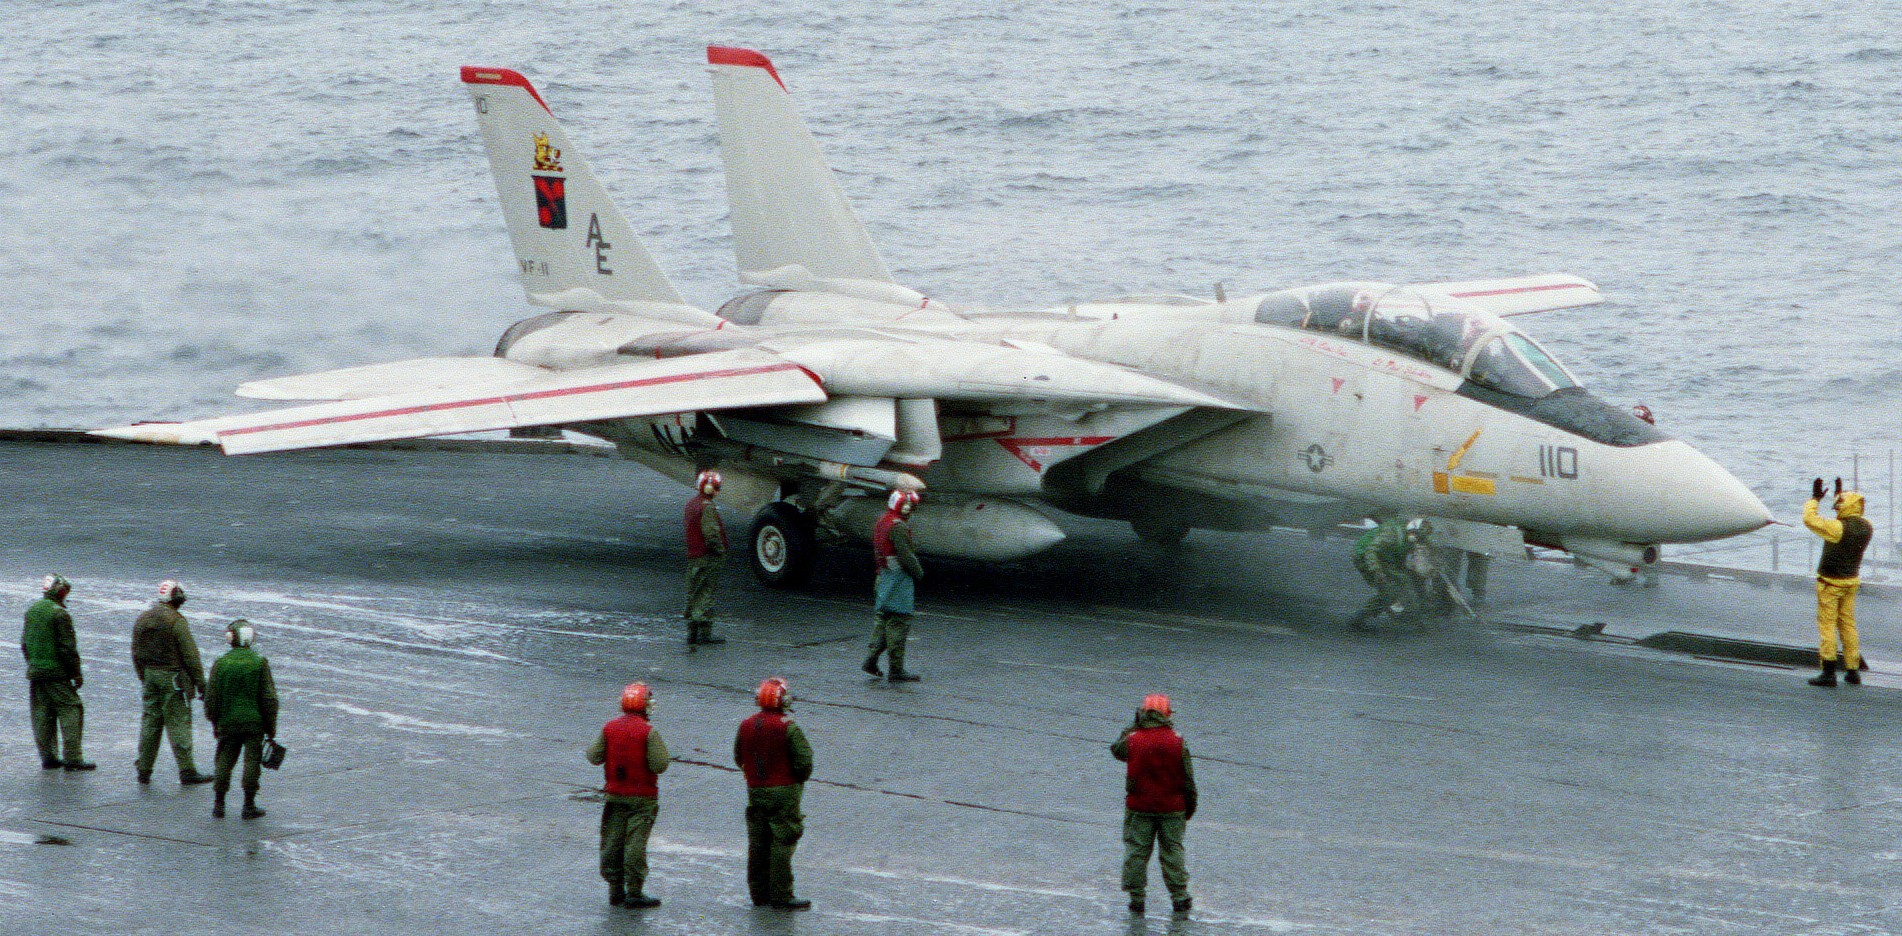 vf-11 red rippers fighter squadron us navy fitron f-14a tomcat carrier air wing cvw-6 uss forrestal cv-59 05